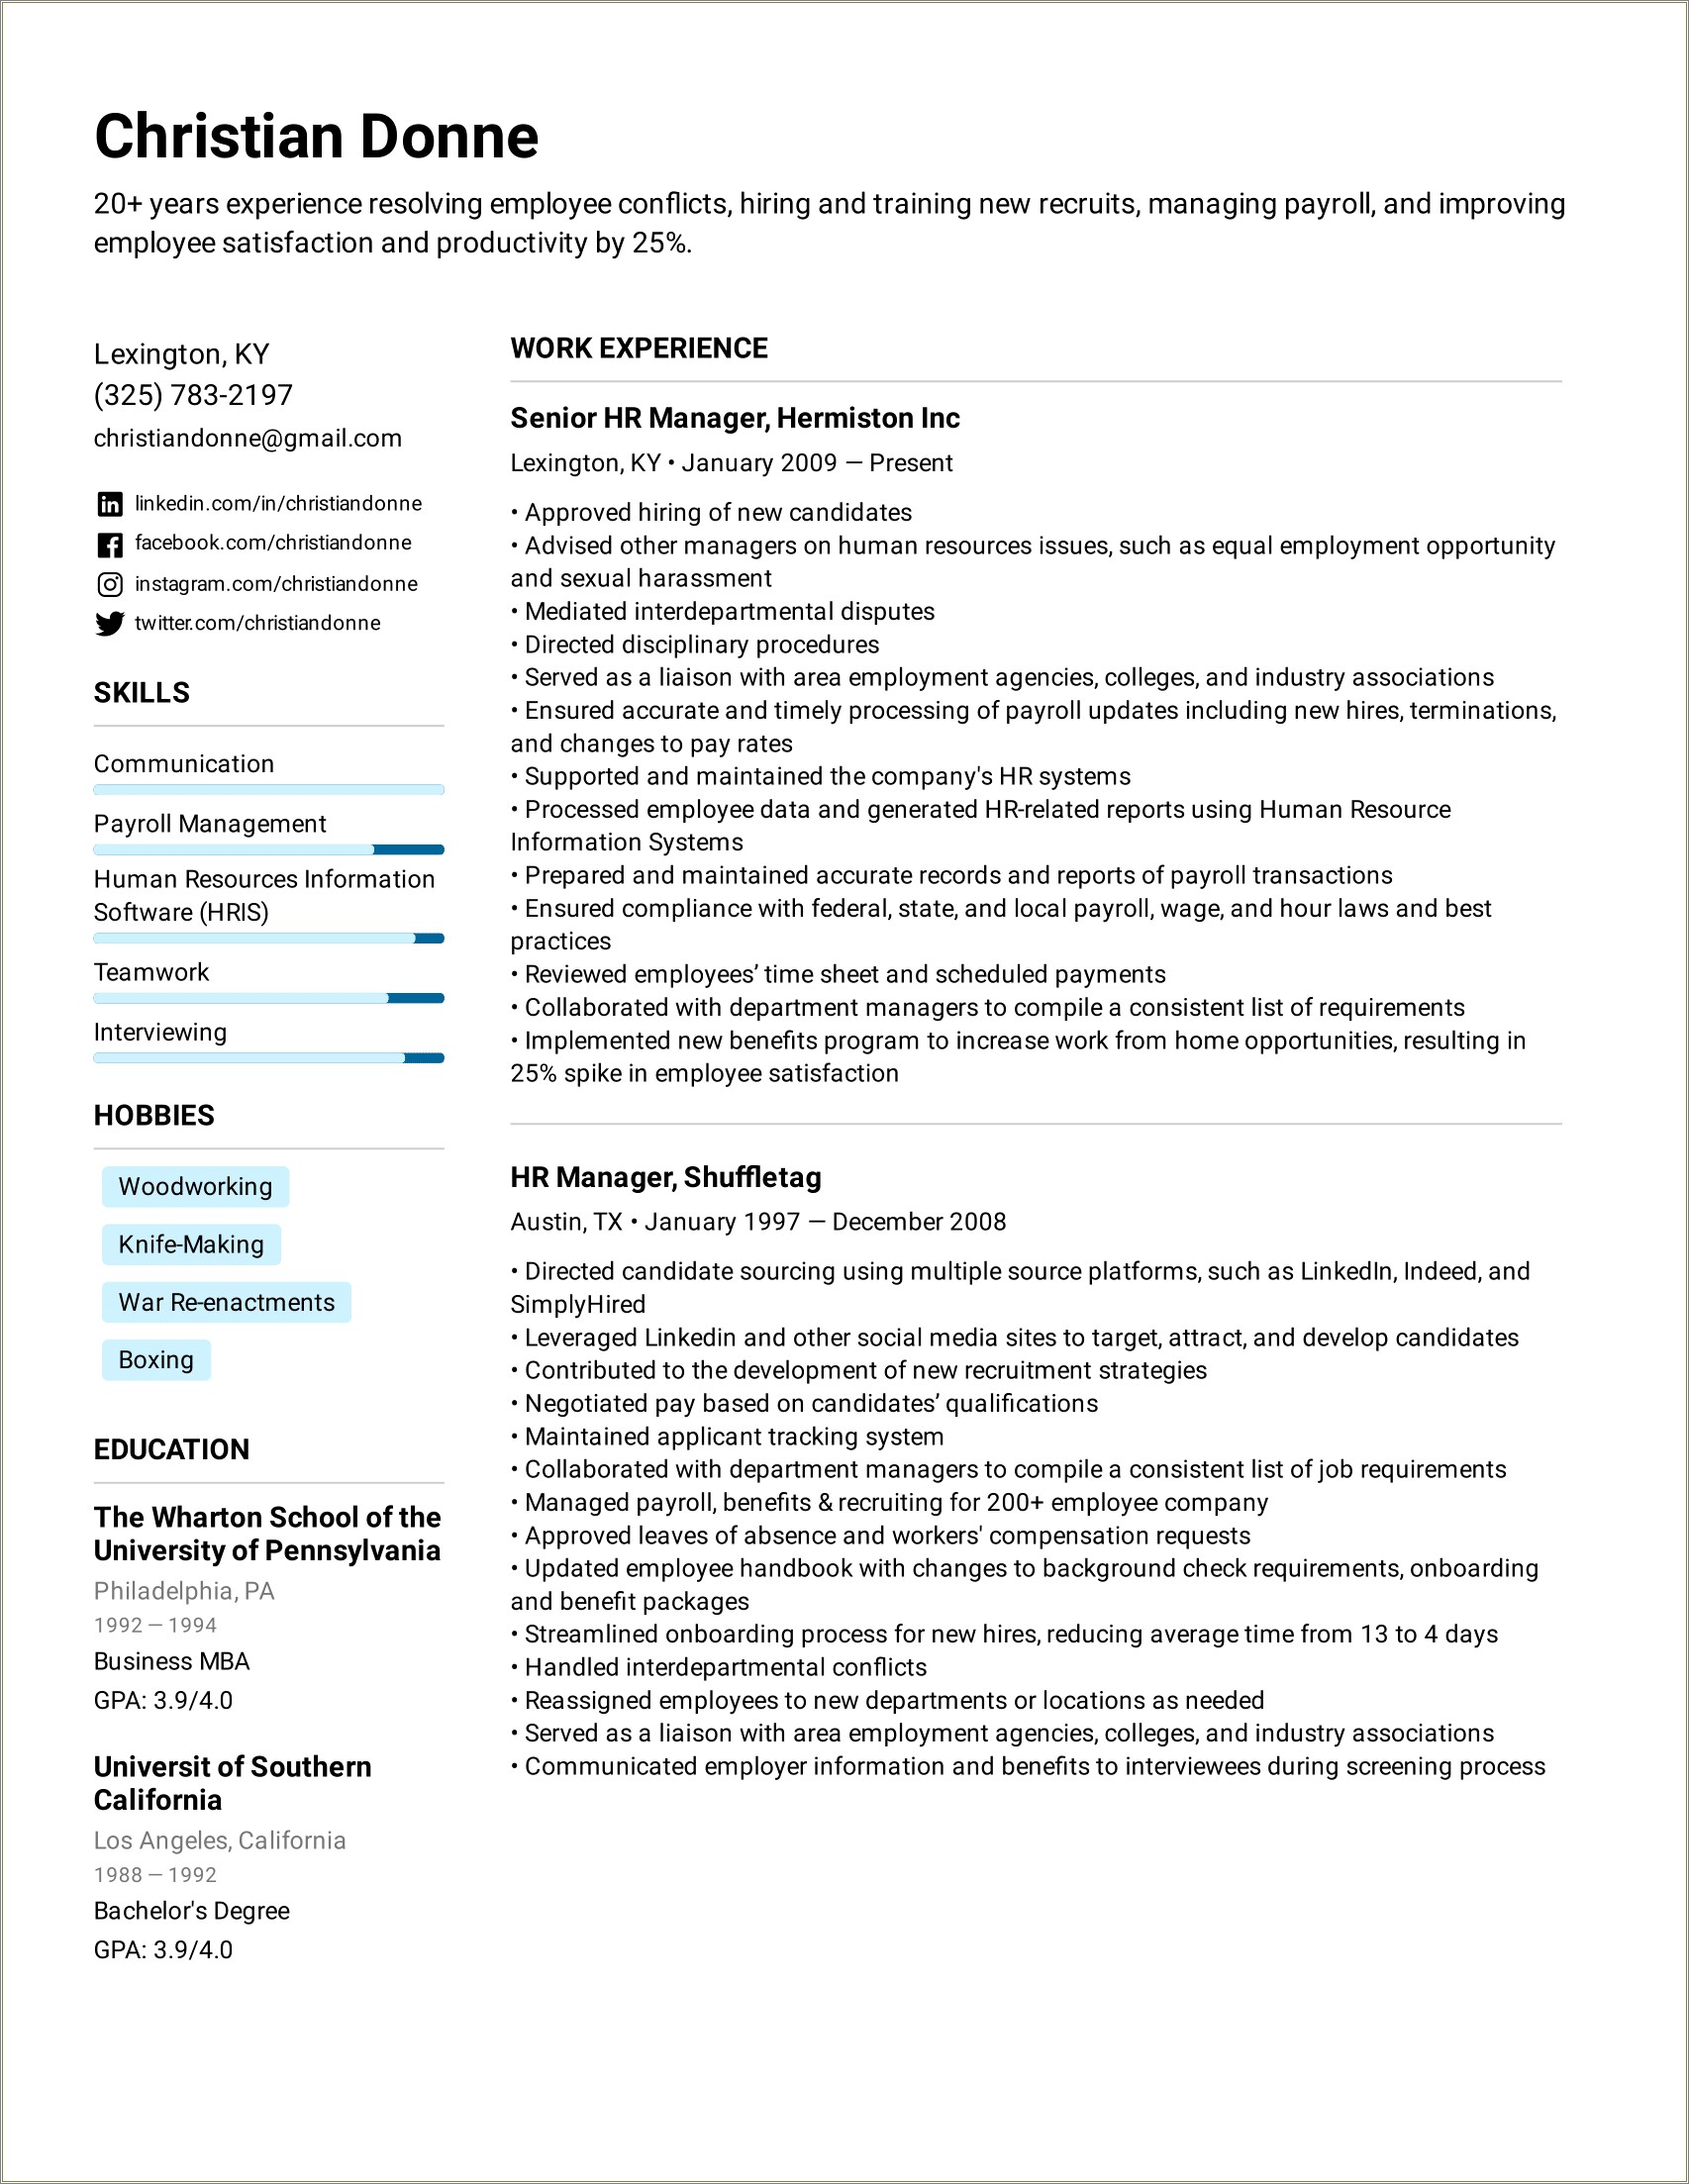 Example Of Human Resource Manager Resume